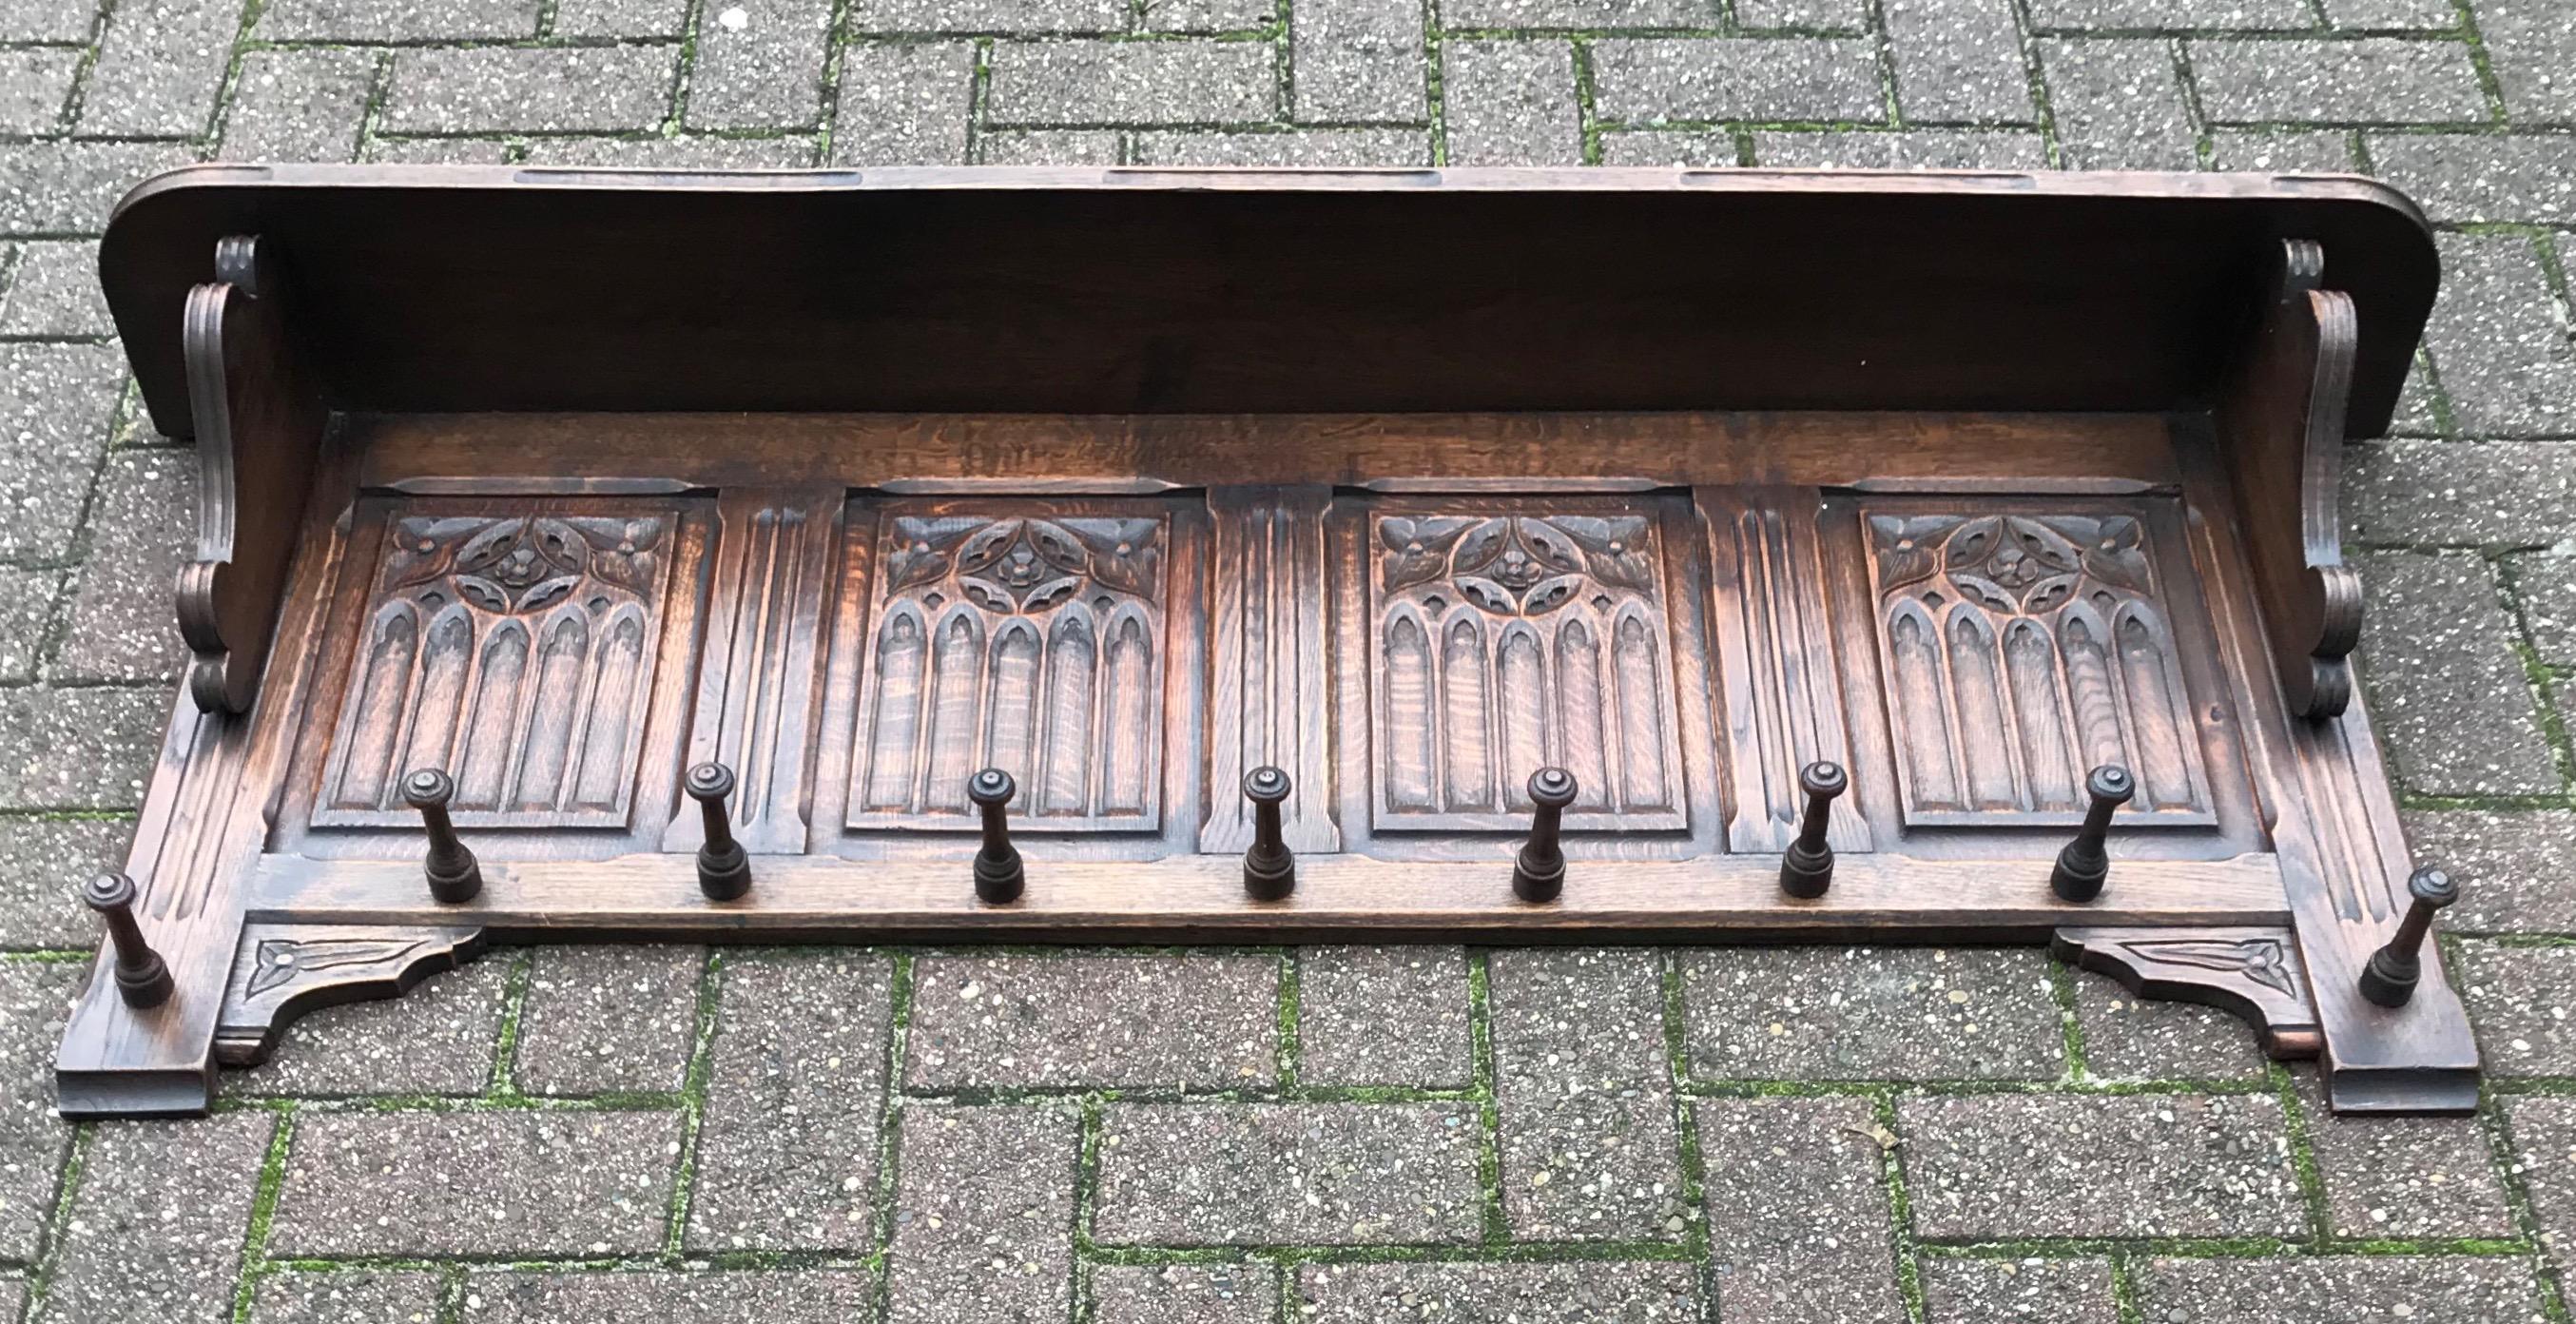 Wonderful craftsmanship solid oak Gothic Revival coat-rack.

Anyone who has ever visited a Gothic (Revival) church or other Gothic style building will immediately recognize the same stunning elements in this all handcrafted coat rack. The symmetry